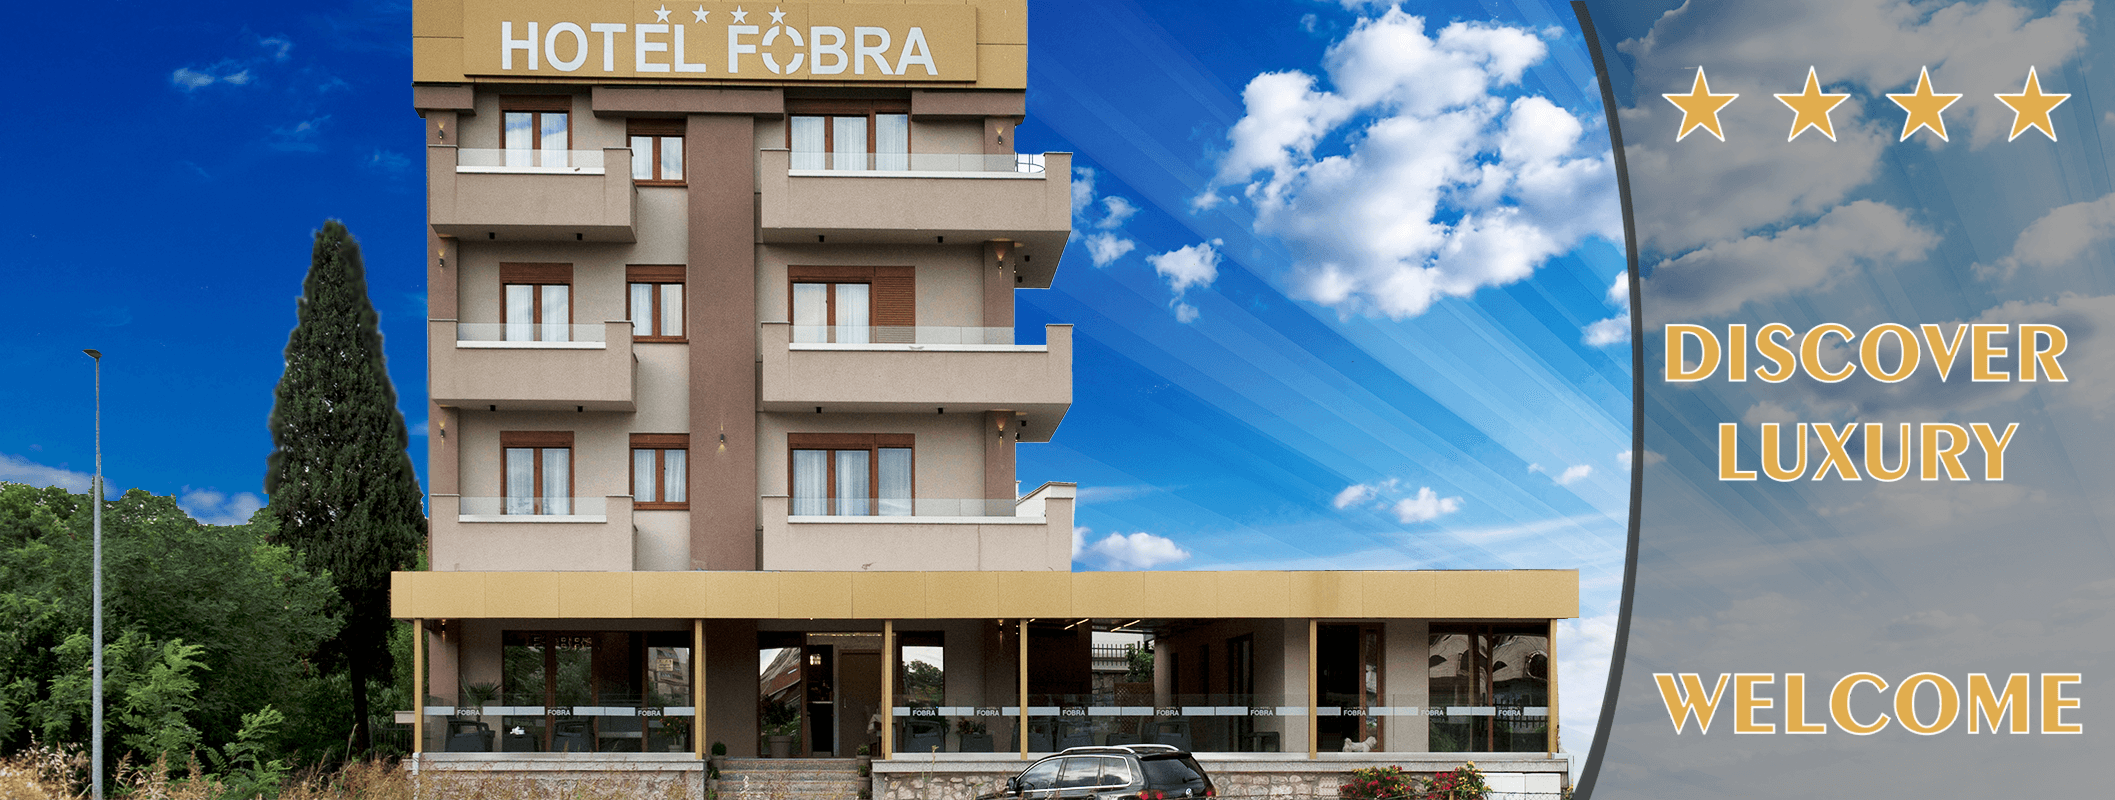 Hotel Fobra is Now the First EU Ecolabel Hotel in Podgorica 2